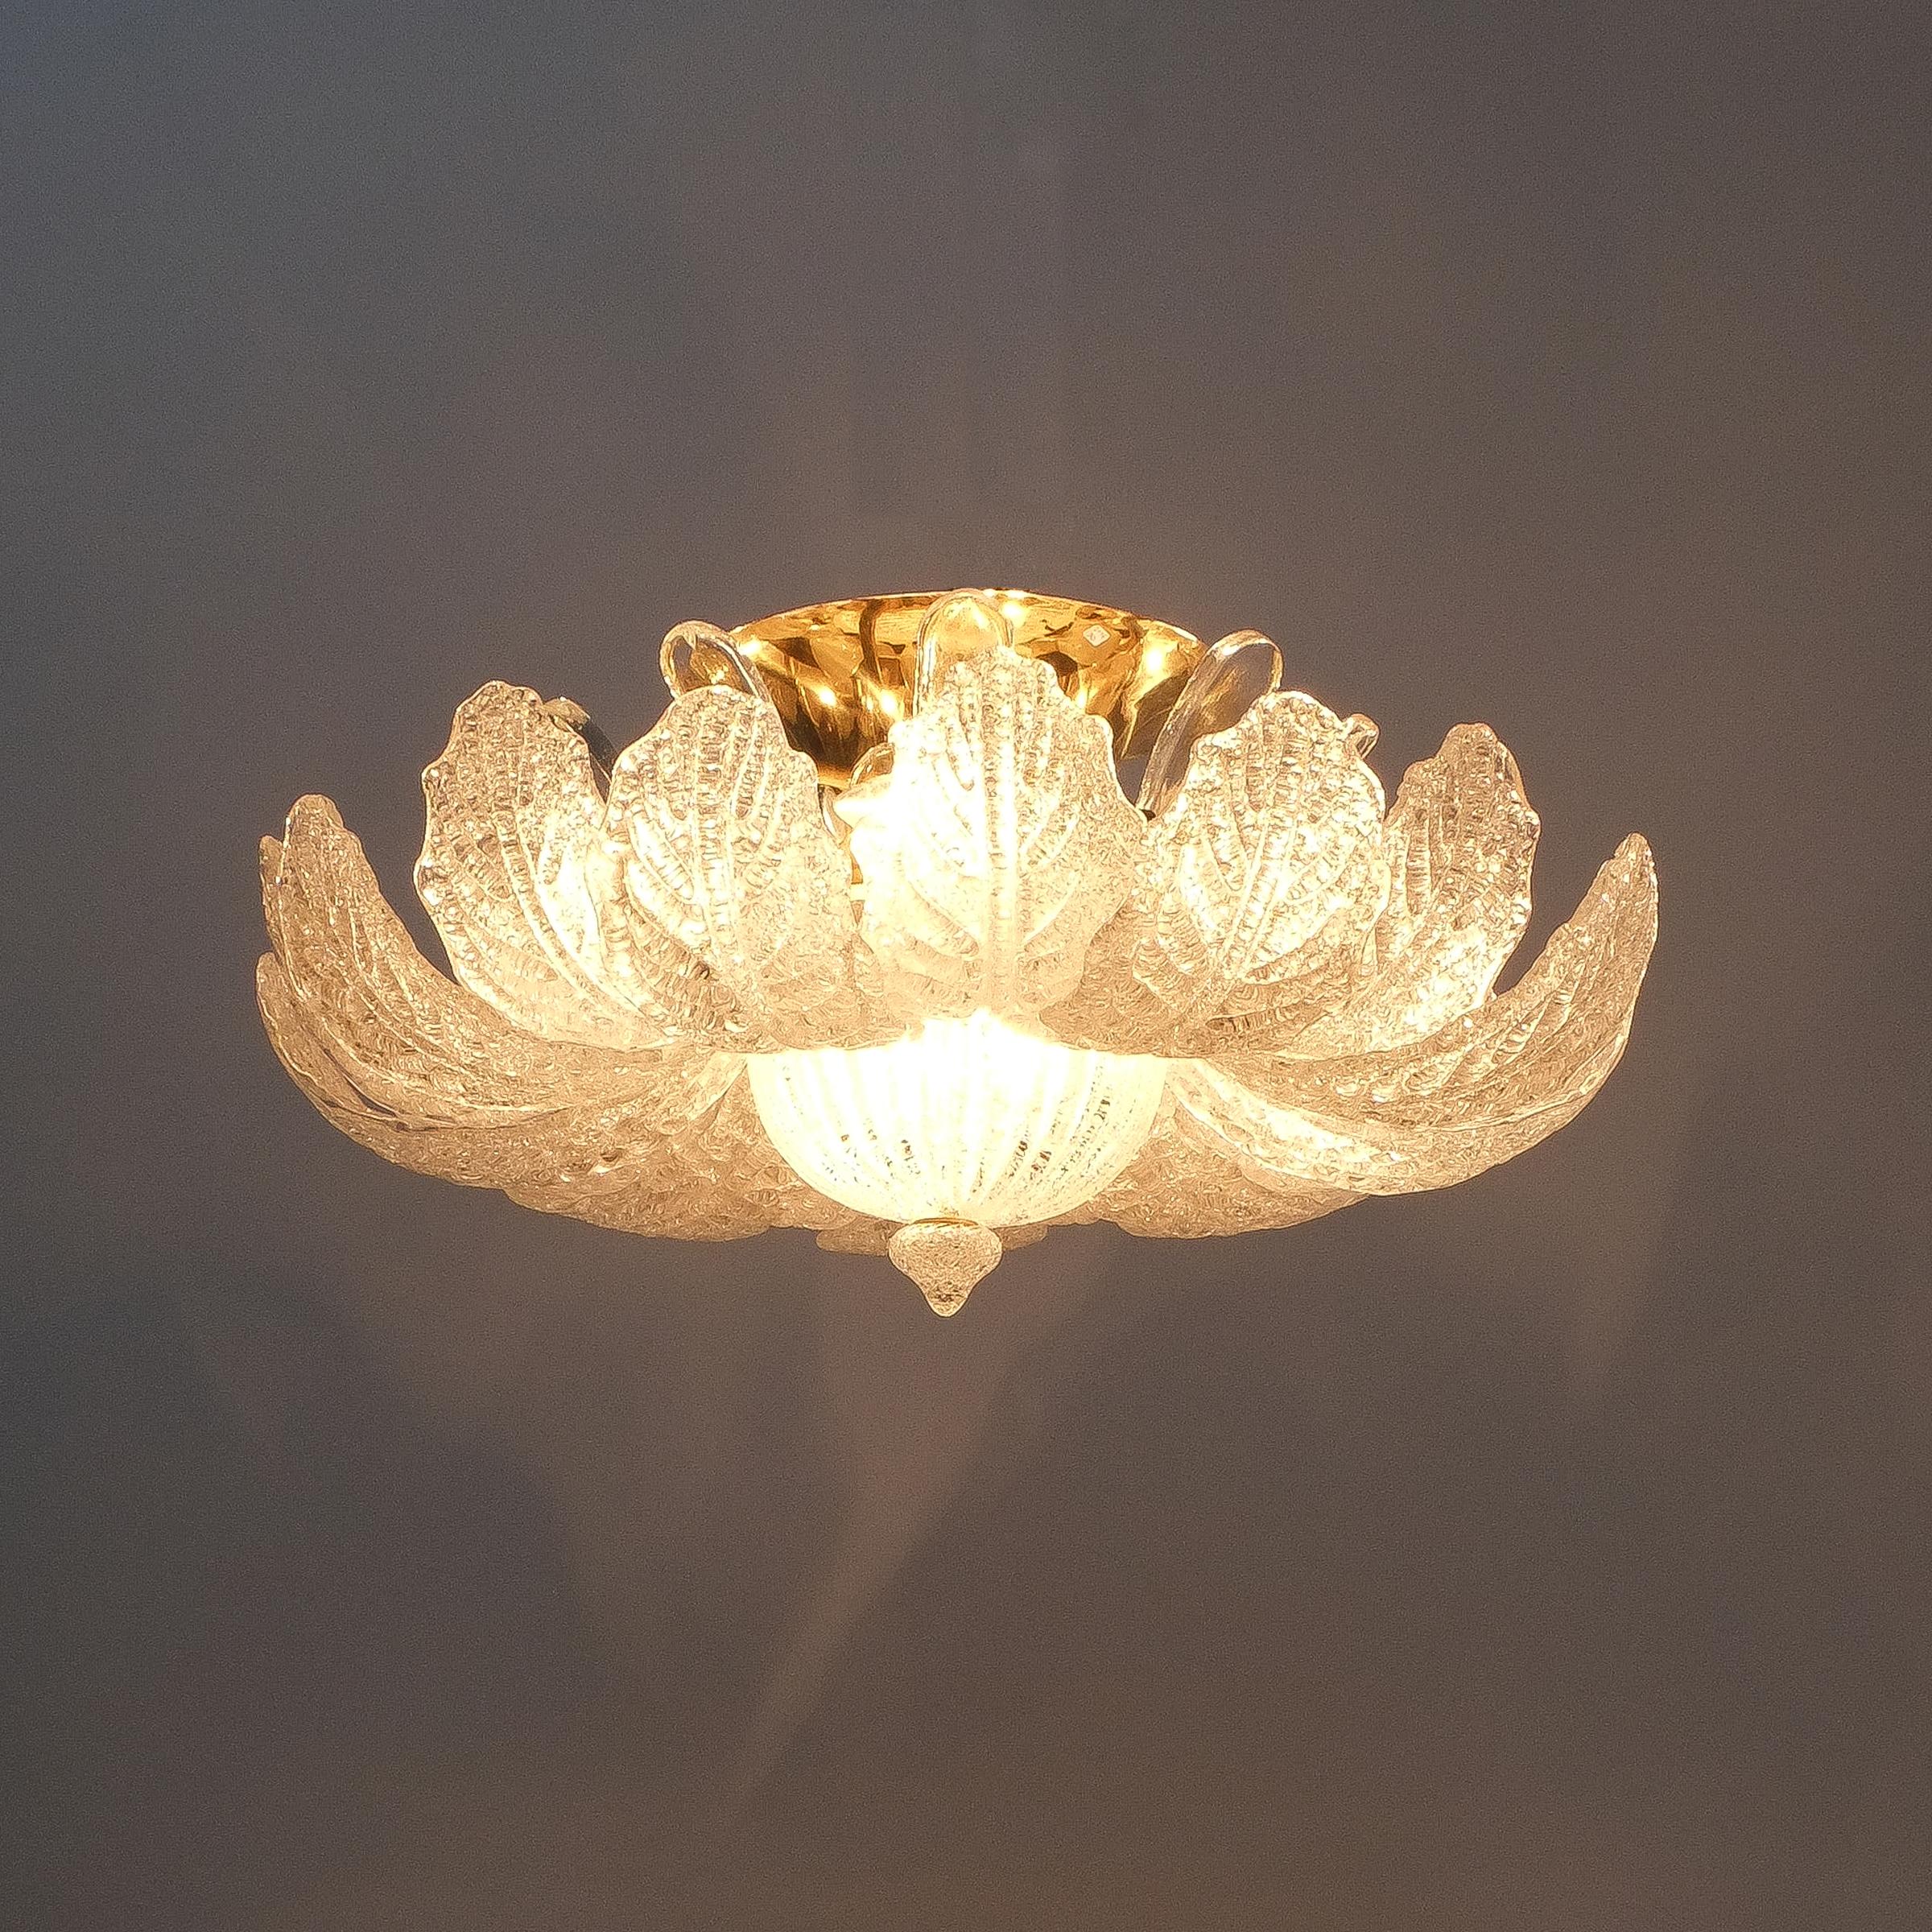 Labelled Barovier Toso flush mount in excellent condition, Italy circa 1965

Barovier Toso flush mount or chandelier from glass and brass. Wonderful handmade petal glass pieces circulating around brass hardware. The ceiling light is labelled and